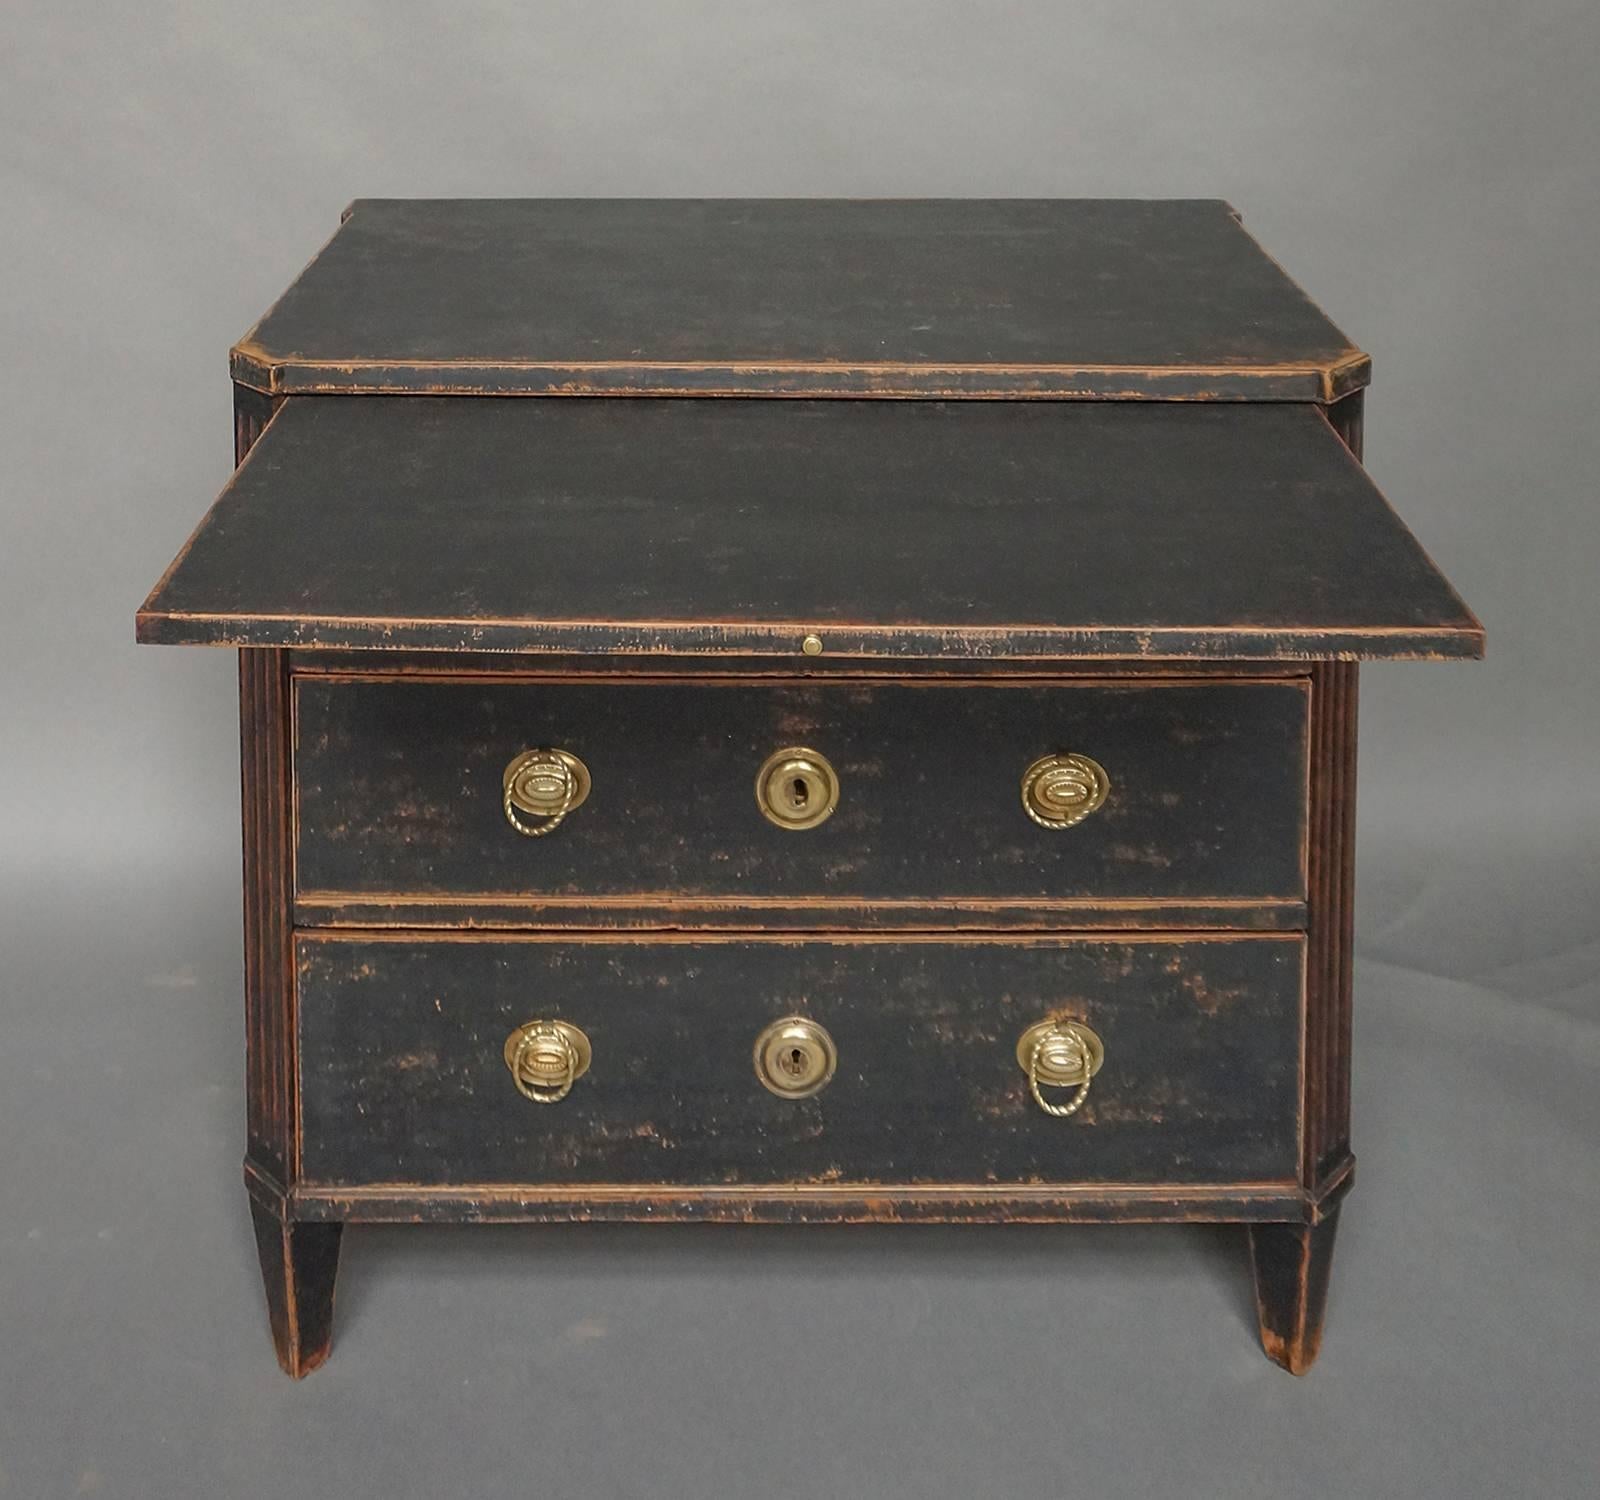 Period Gustavian three-drawer chest, Sweden circa 1800, with its original brass hardware and pull-out shelf. Canted corners with reeding and tapering, square legs.